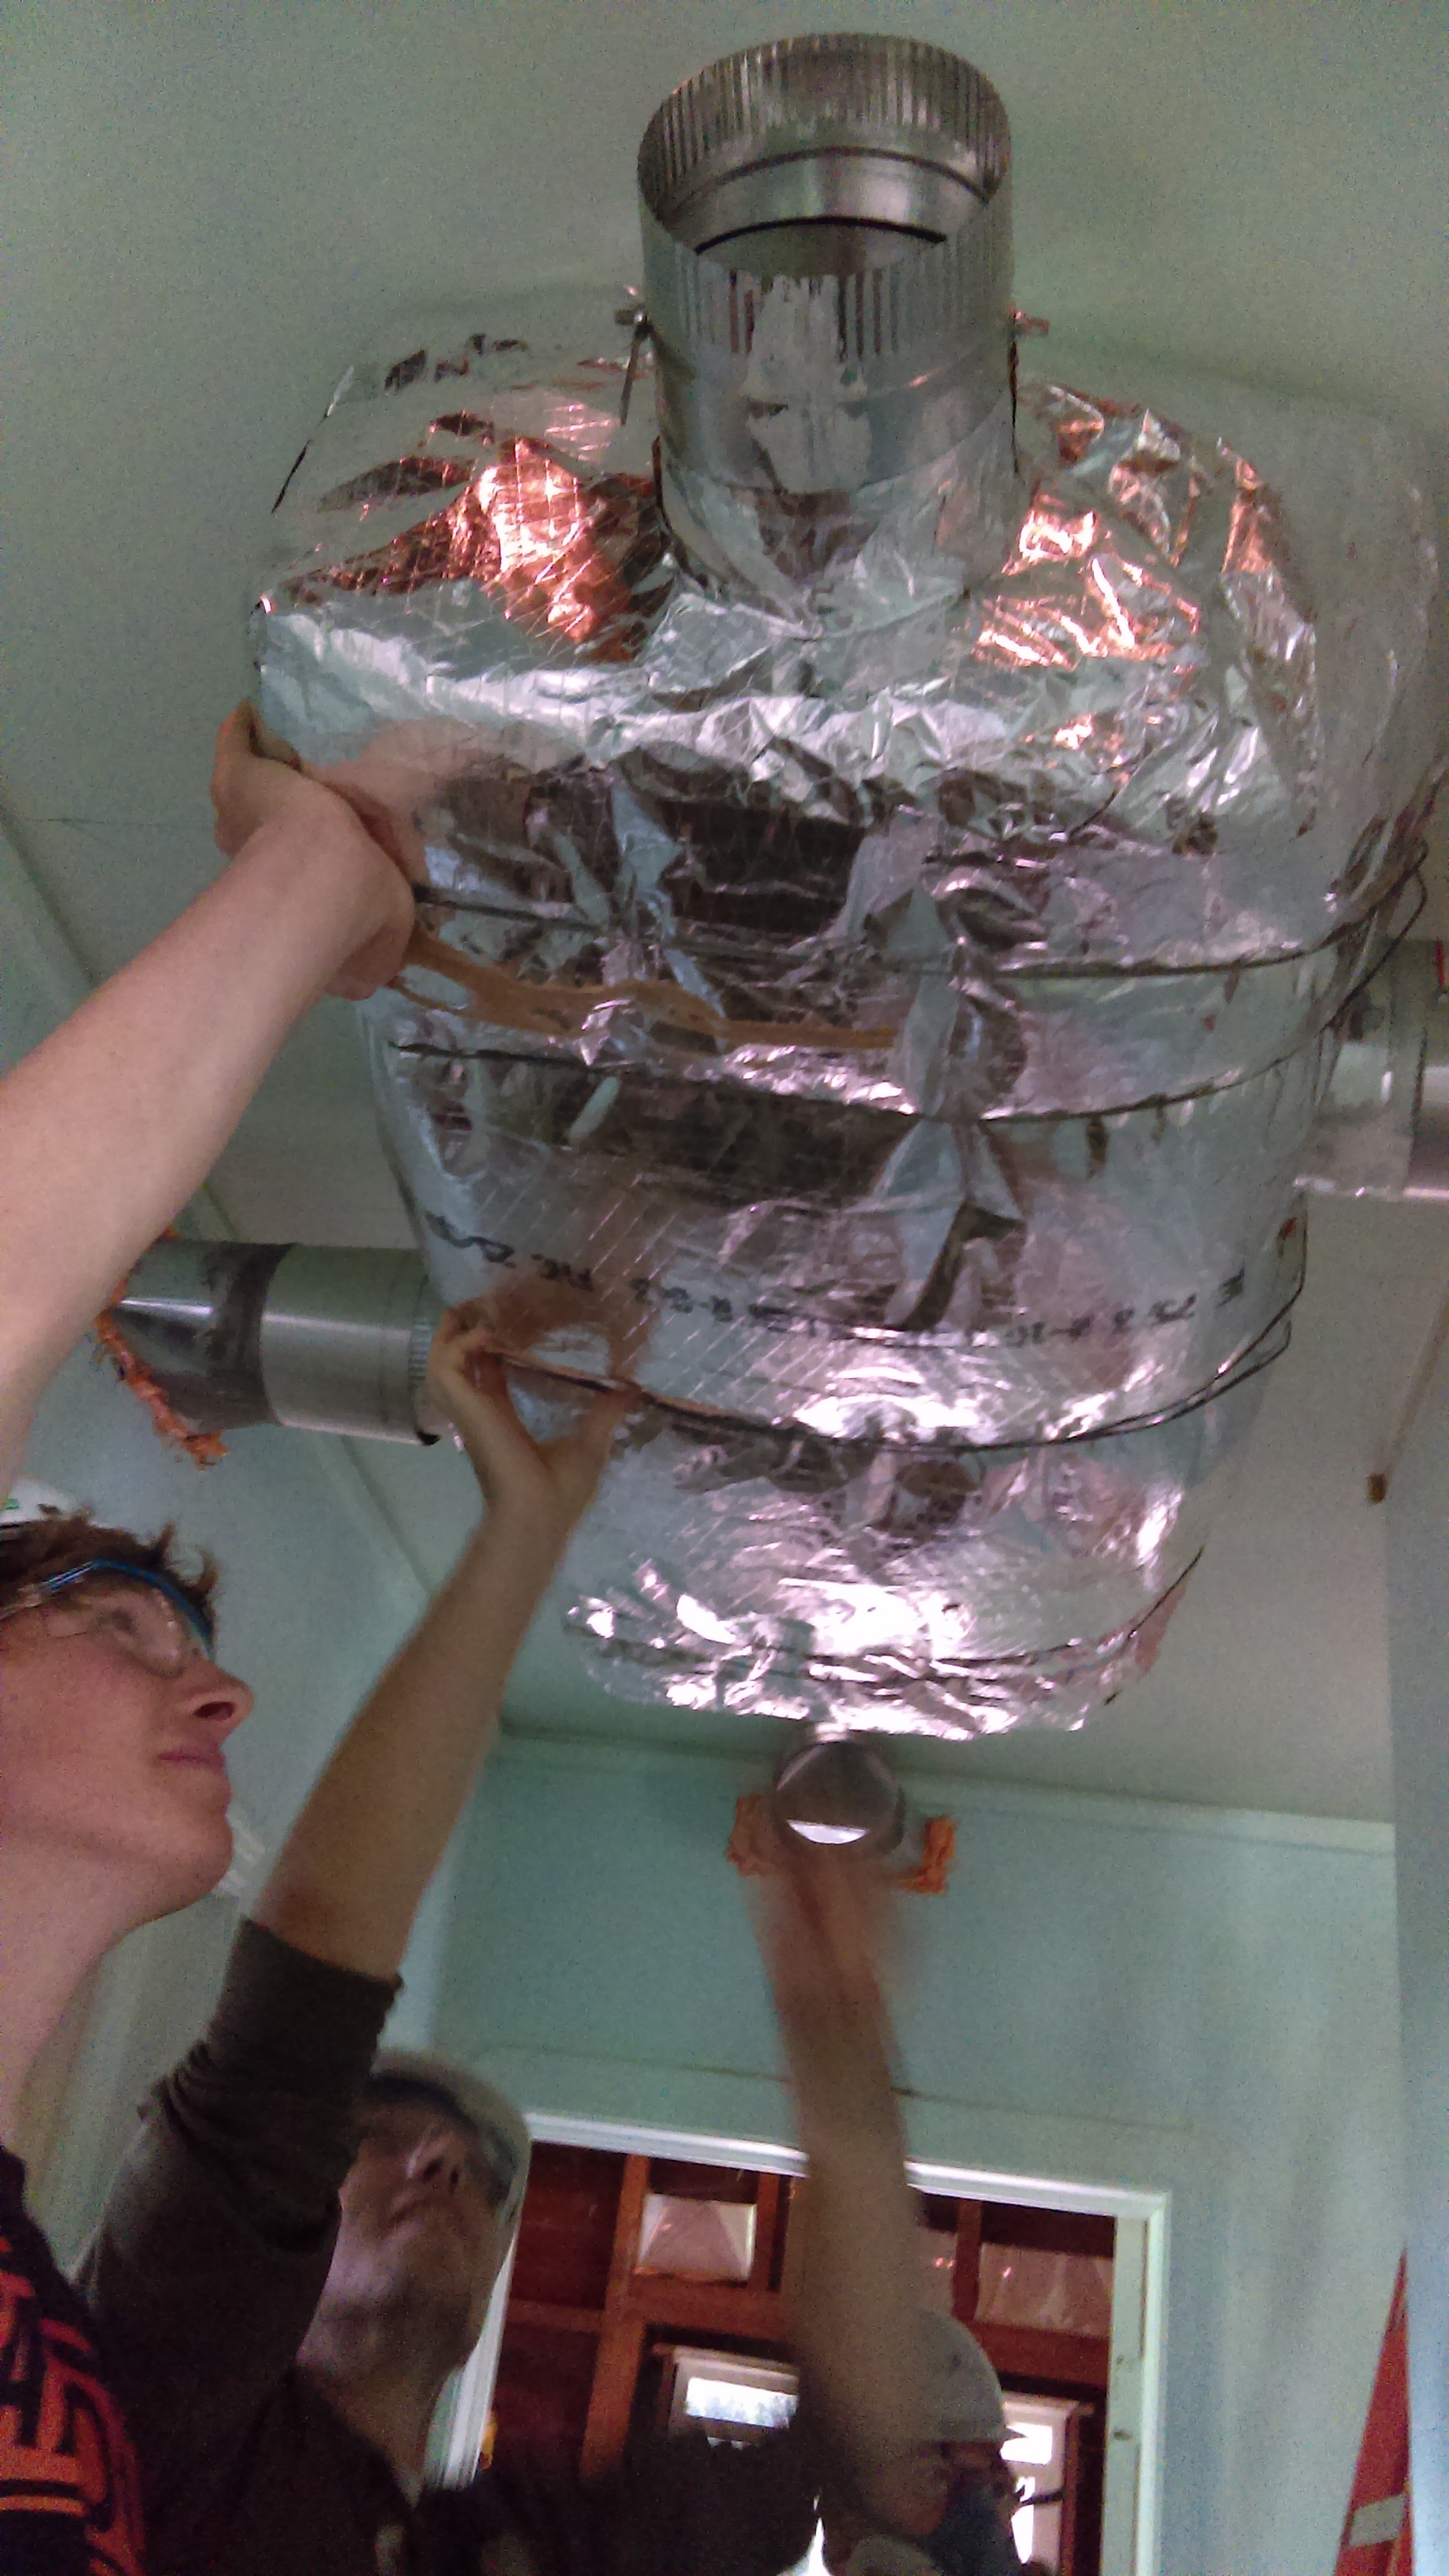 Installing plenum for heat and cold air distribution